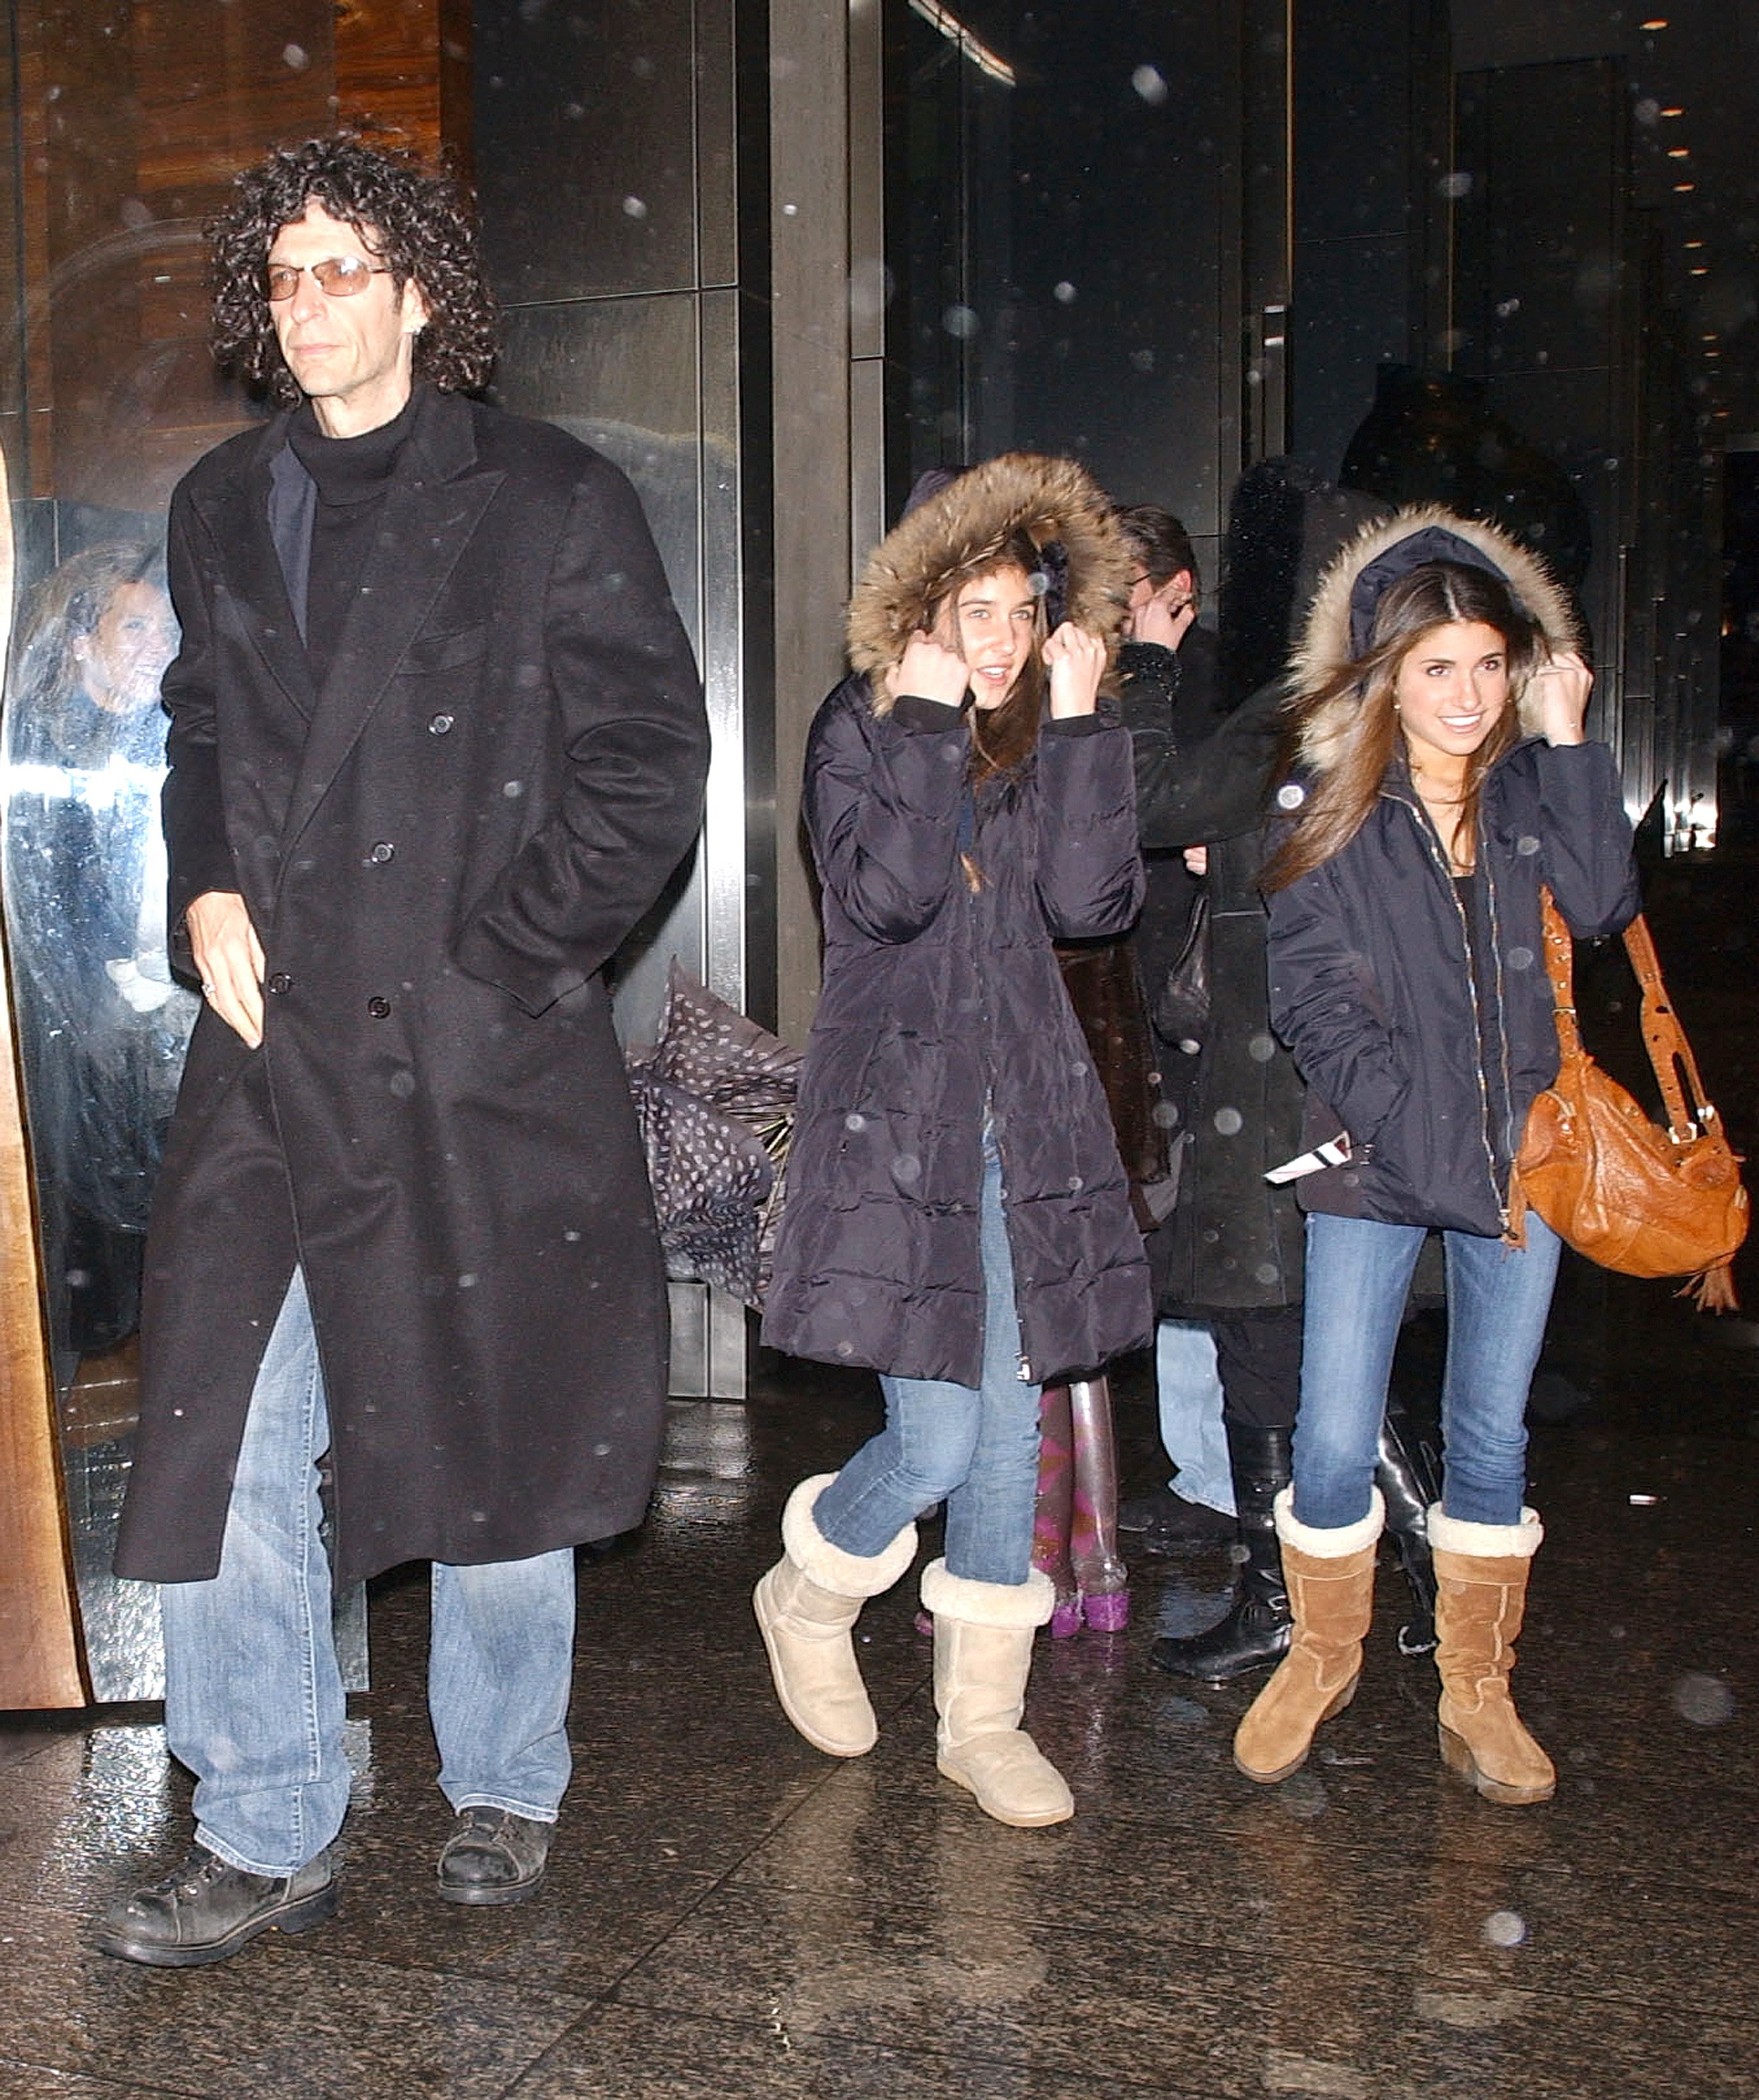 Howard Stern with his daughters, Ashley and Deborah, are photographed as they leave a midtown restaurant on March 16, 2007, in New York City | Source: Getty Images